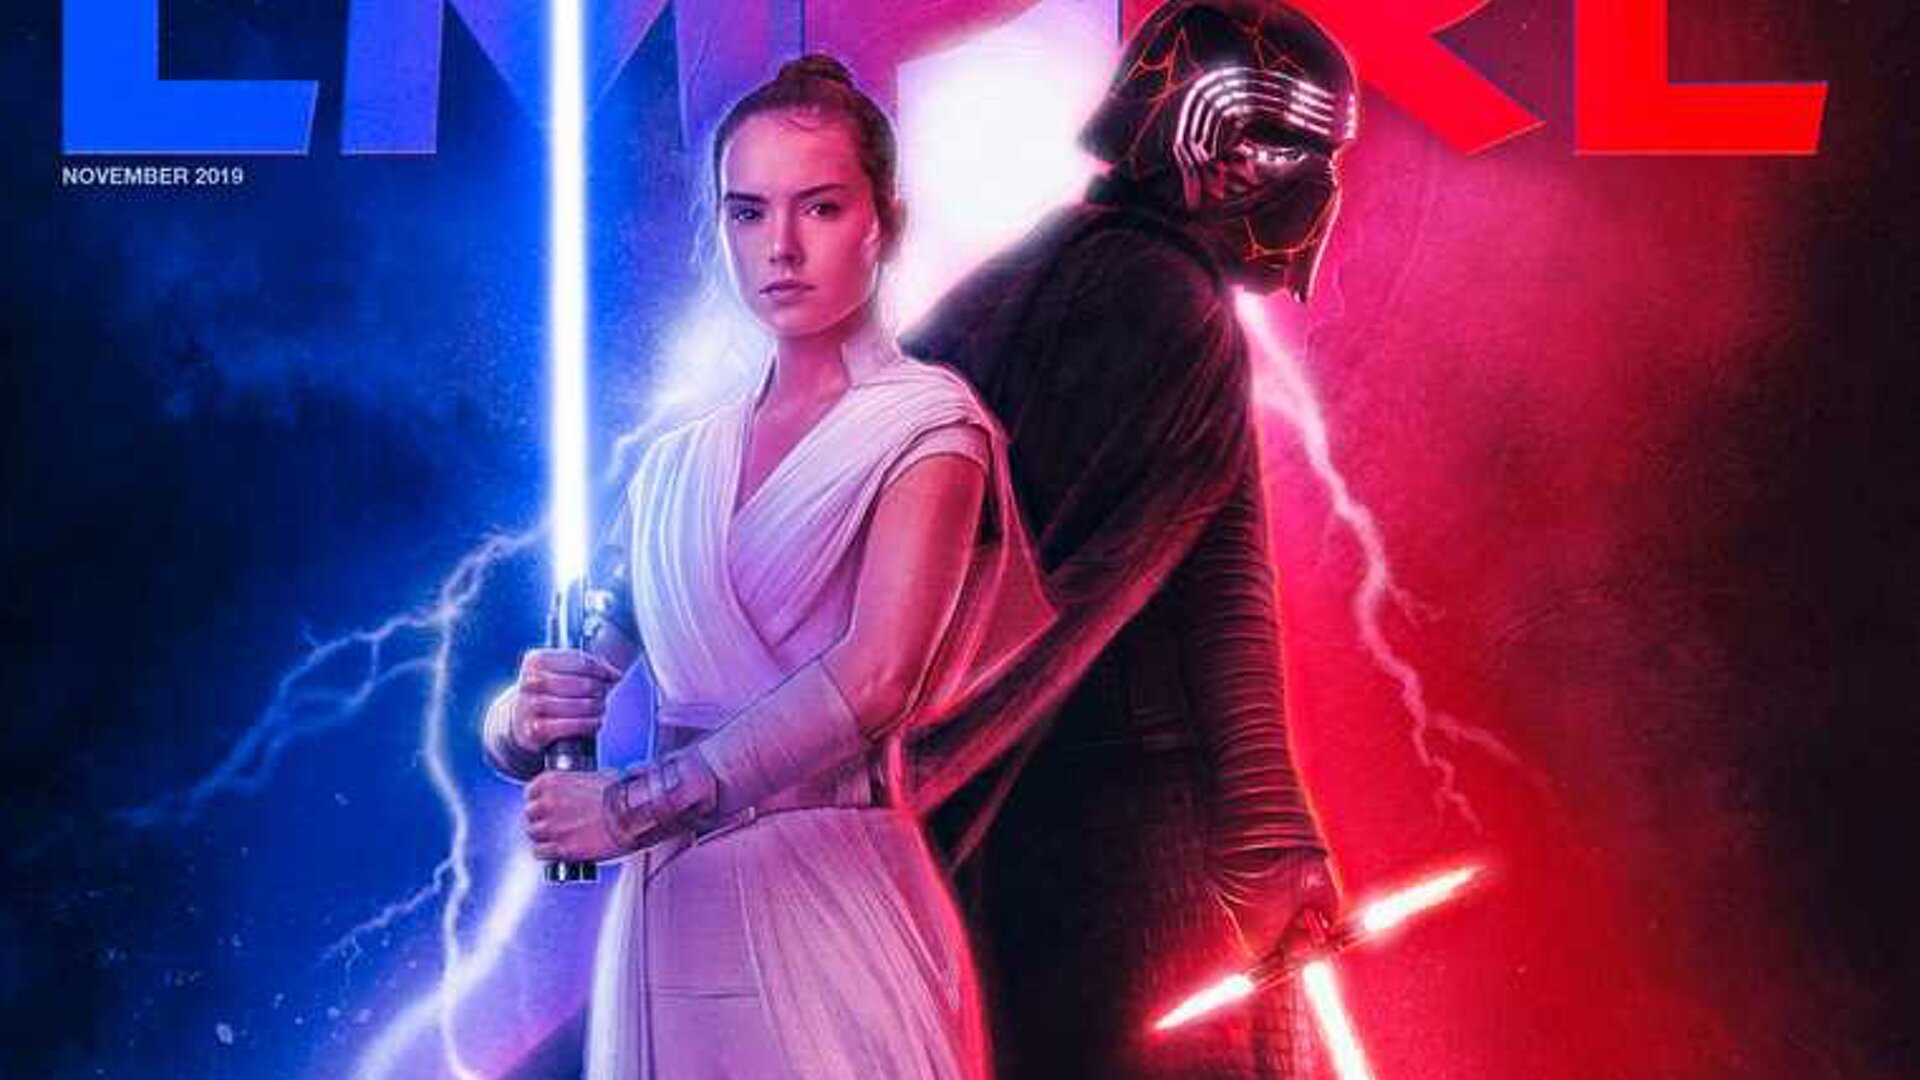 Star Wars: The Rise of Skywalker: The Review Full of Spoilers